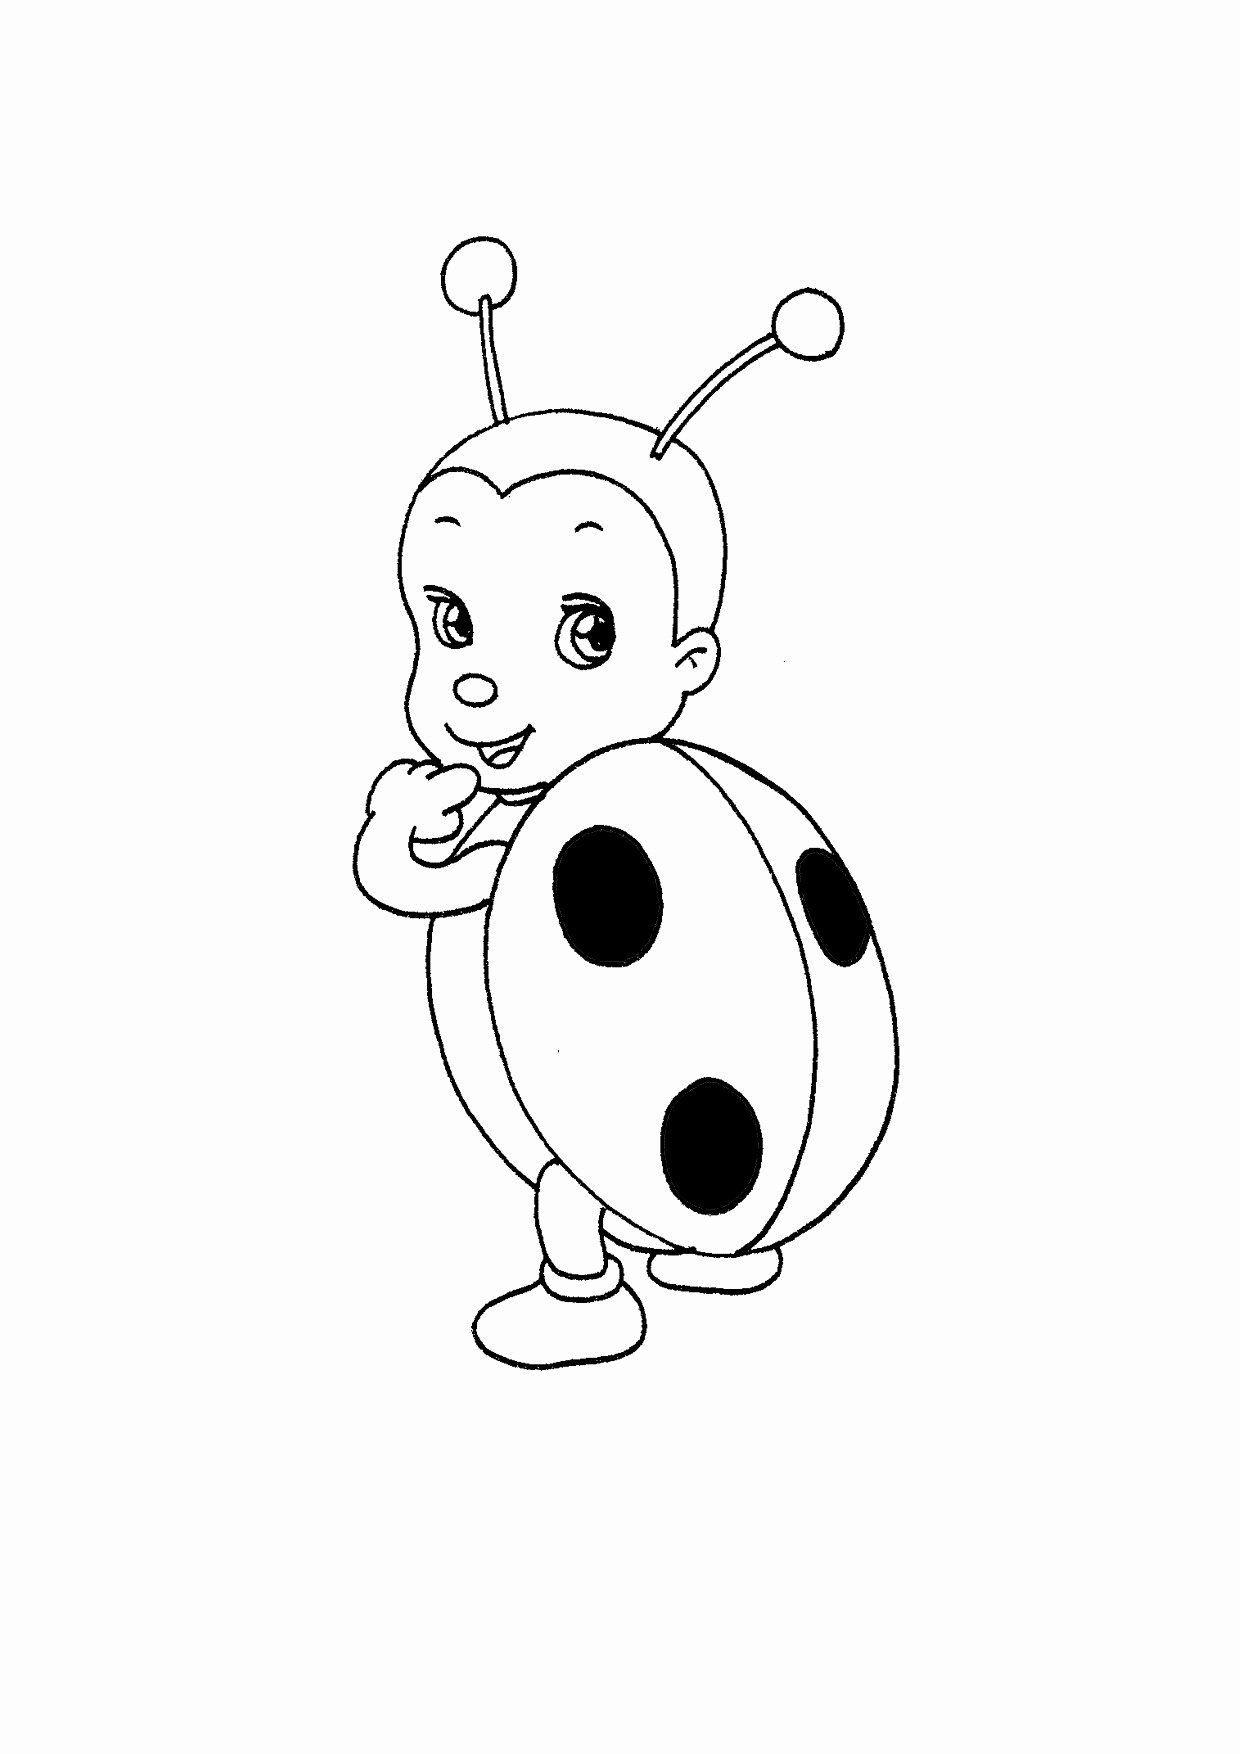 bug coloring pages printable